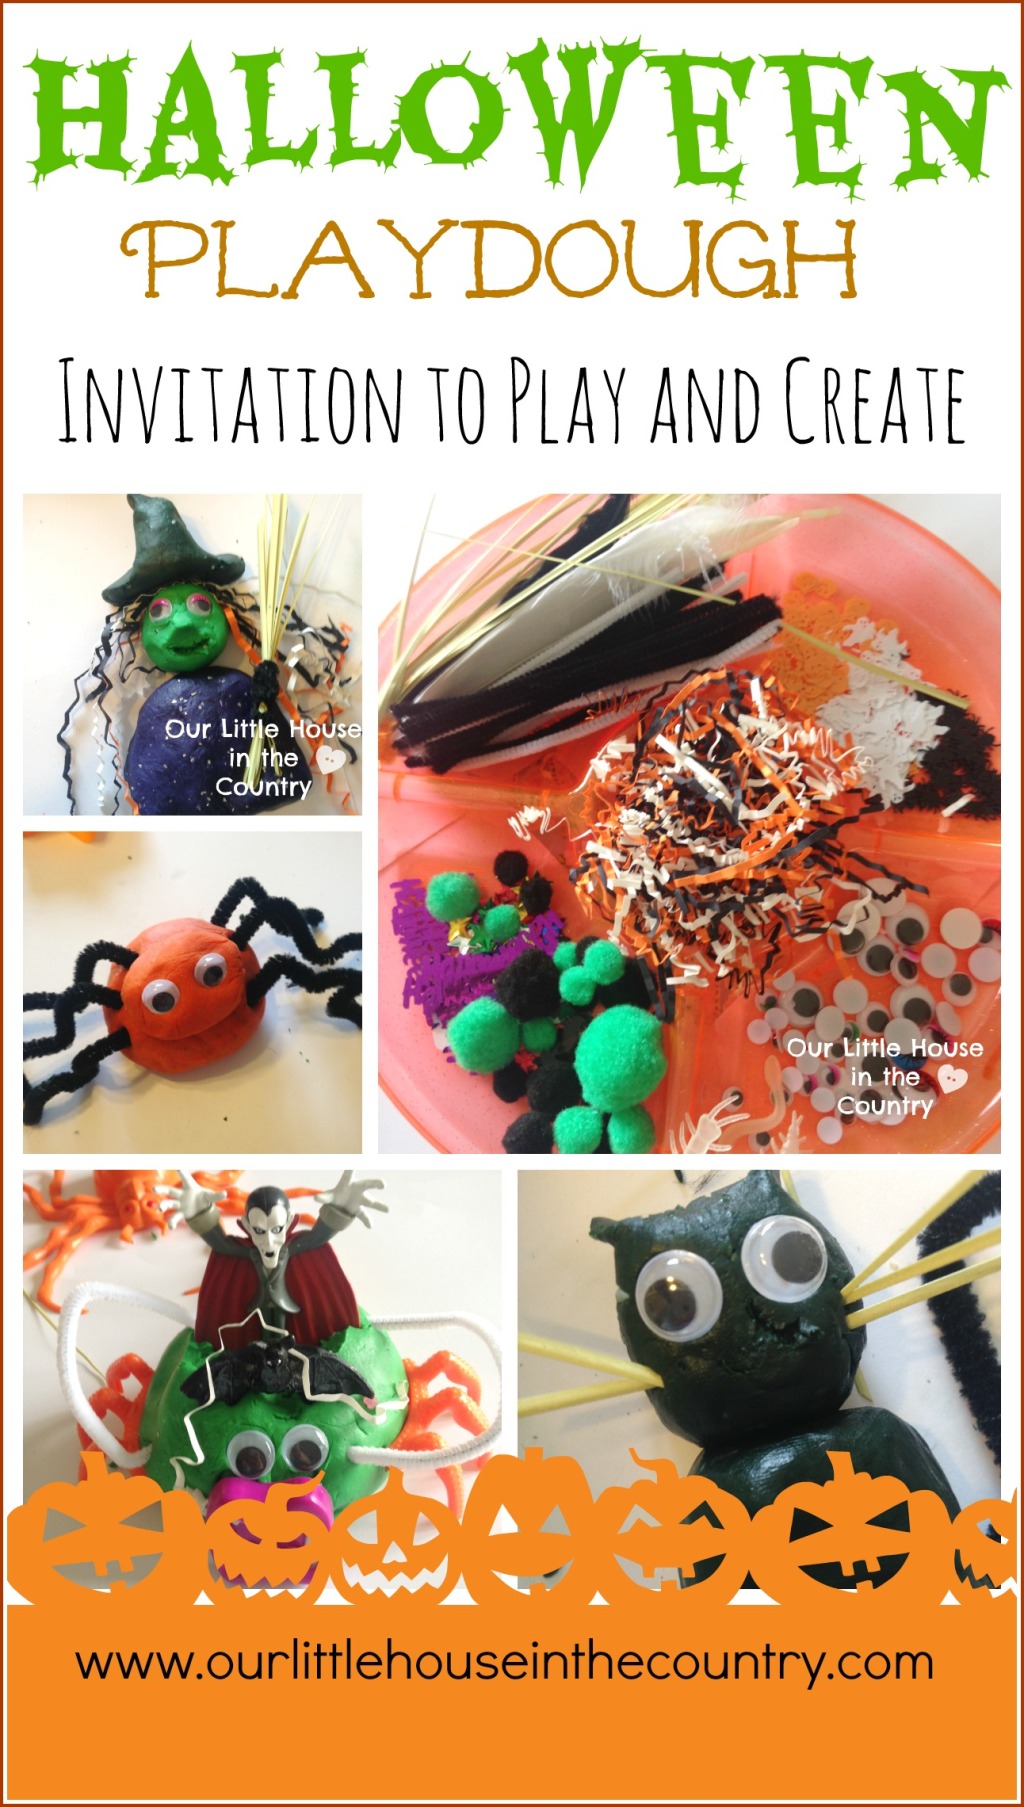 Halloween Playdough – A Ghoulish Invitation to Play and Create!